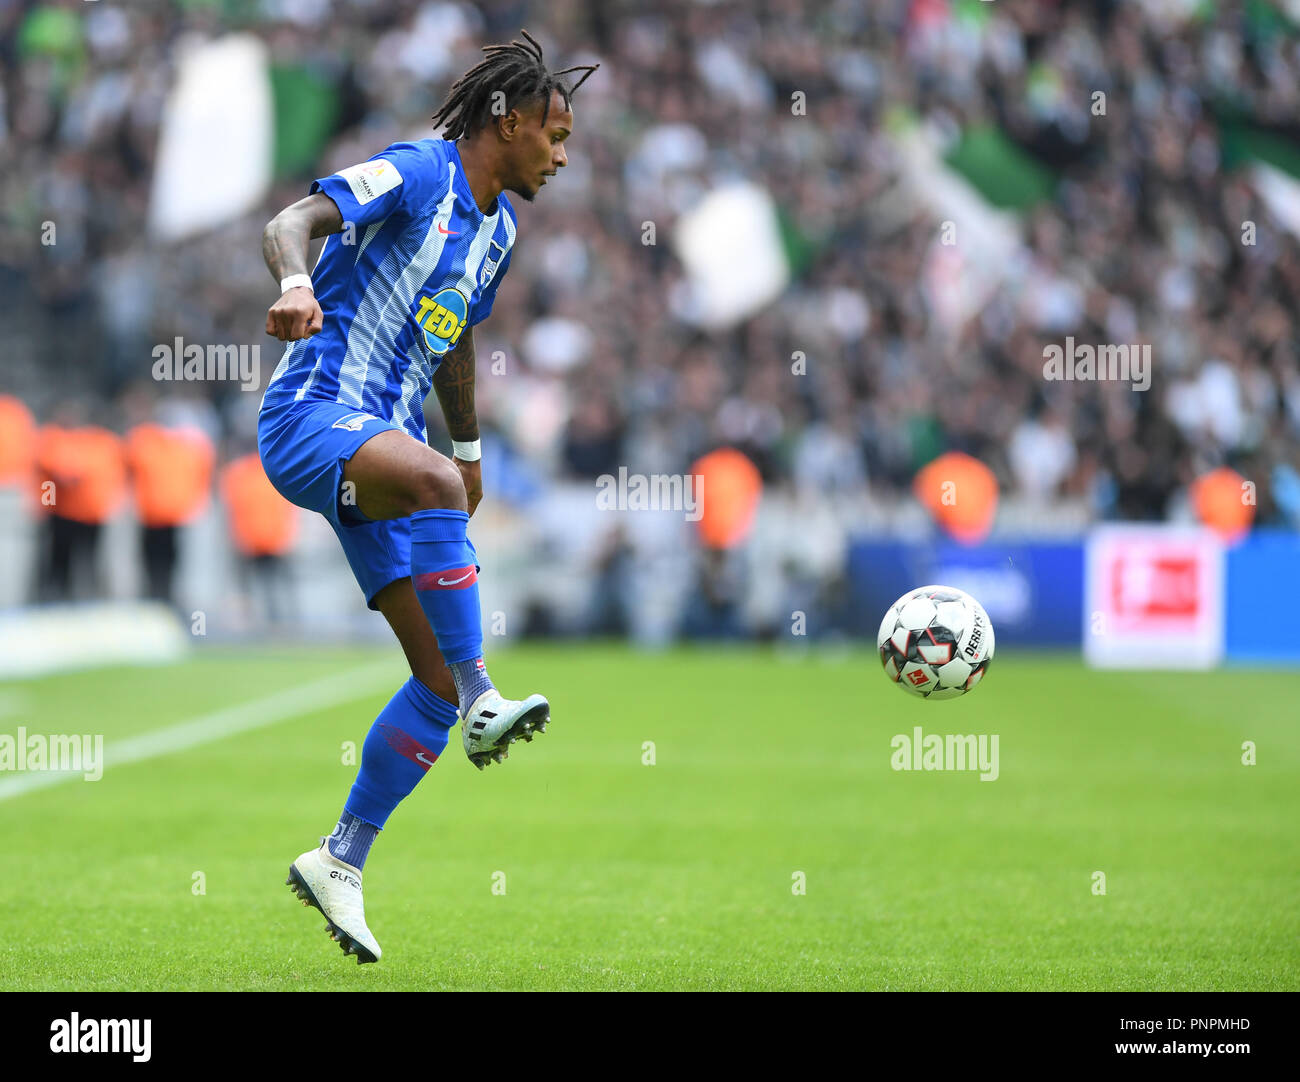 22 September 2018, Berlin: Soccer: Bundesliga, Hertha BSC vs Borussia Moenchengladbach, 4th matchday at the Olympic Stadium. Hertha's Valentino Lazaro. Photo: Soeren Stache/dpa - IMPORTANT NOTICE: DFL an d DFB regulations prohibit any use of photographs as image sequences and/or quasi-video. Stock Photo